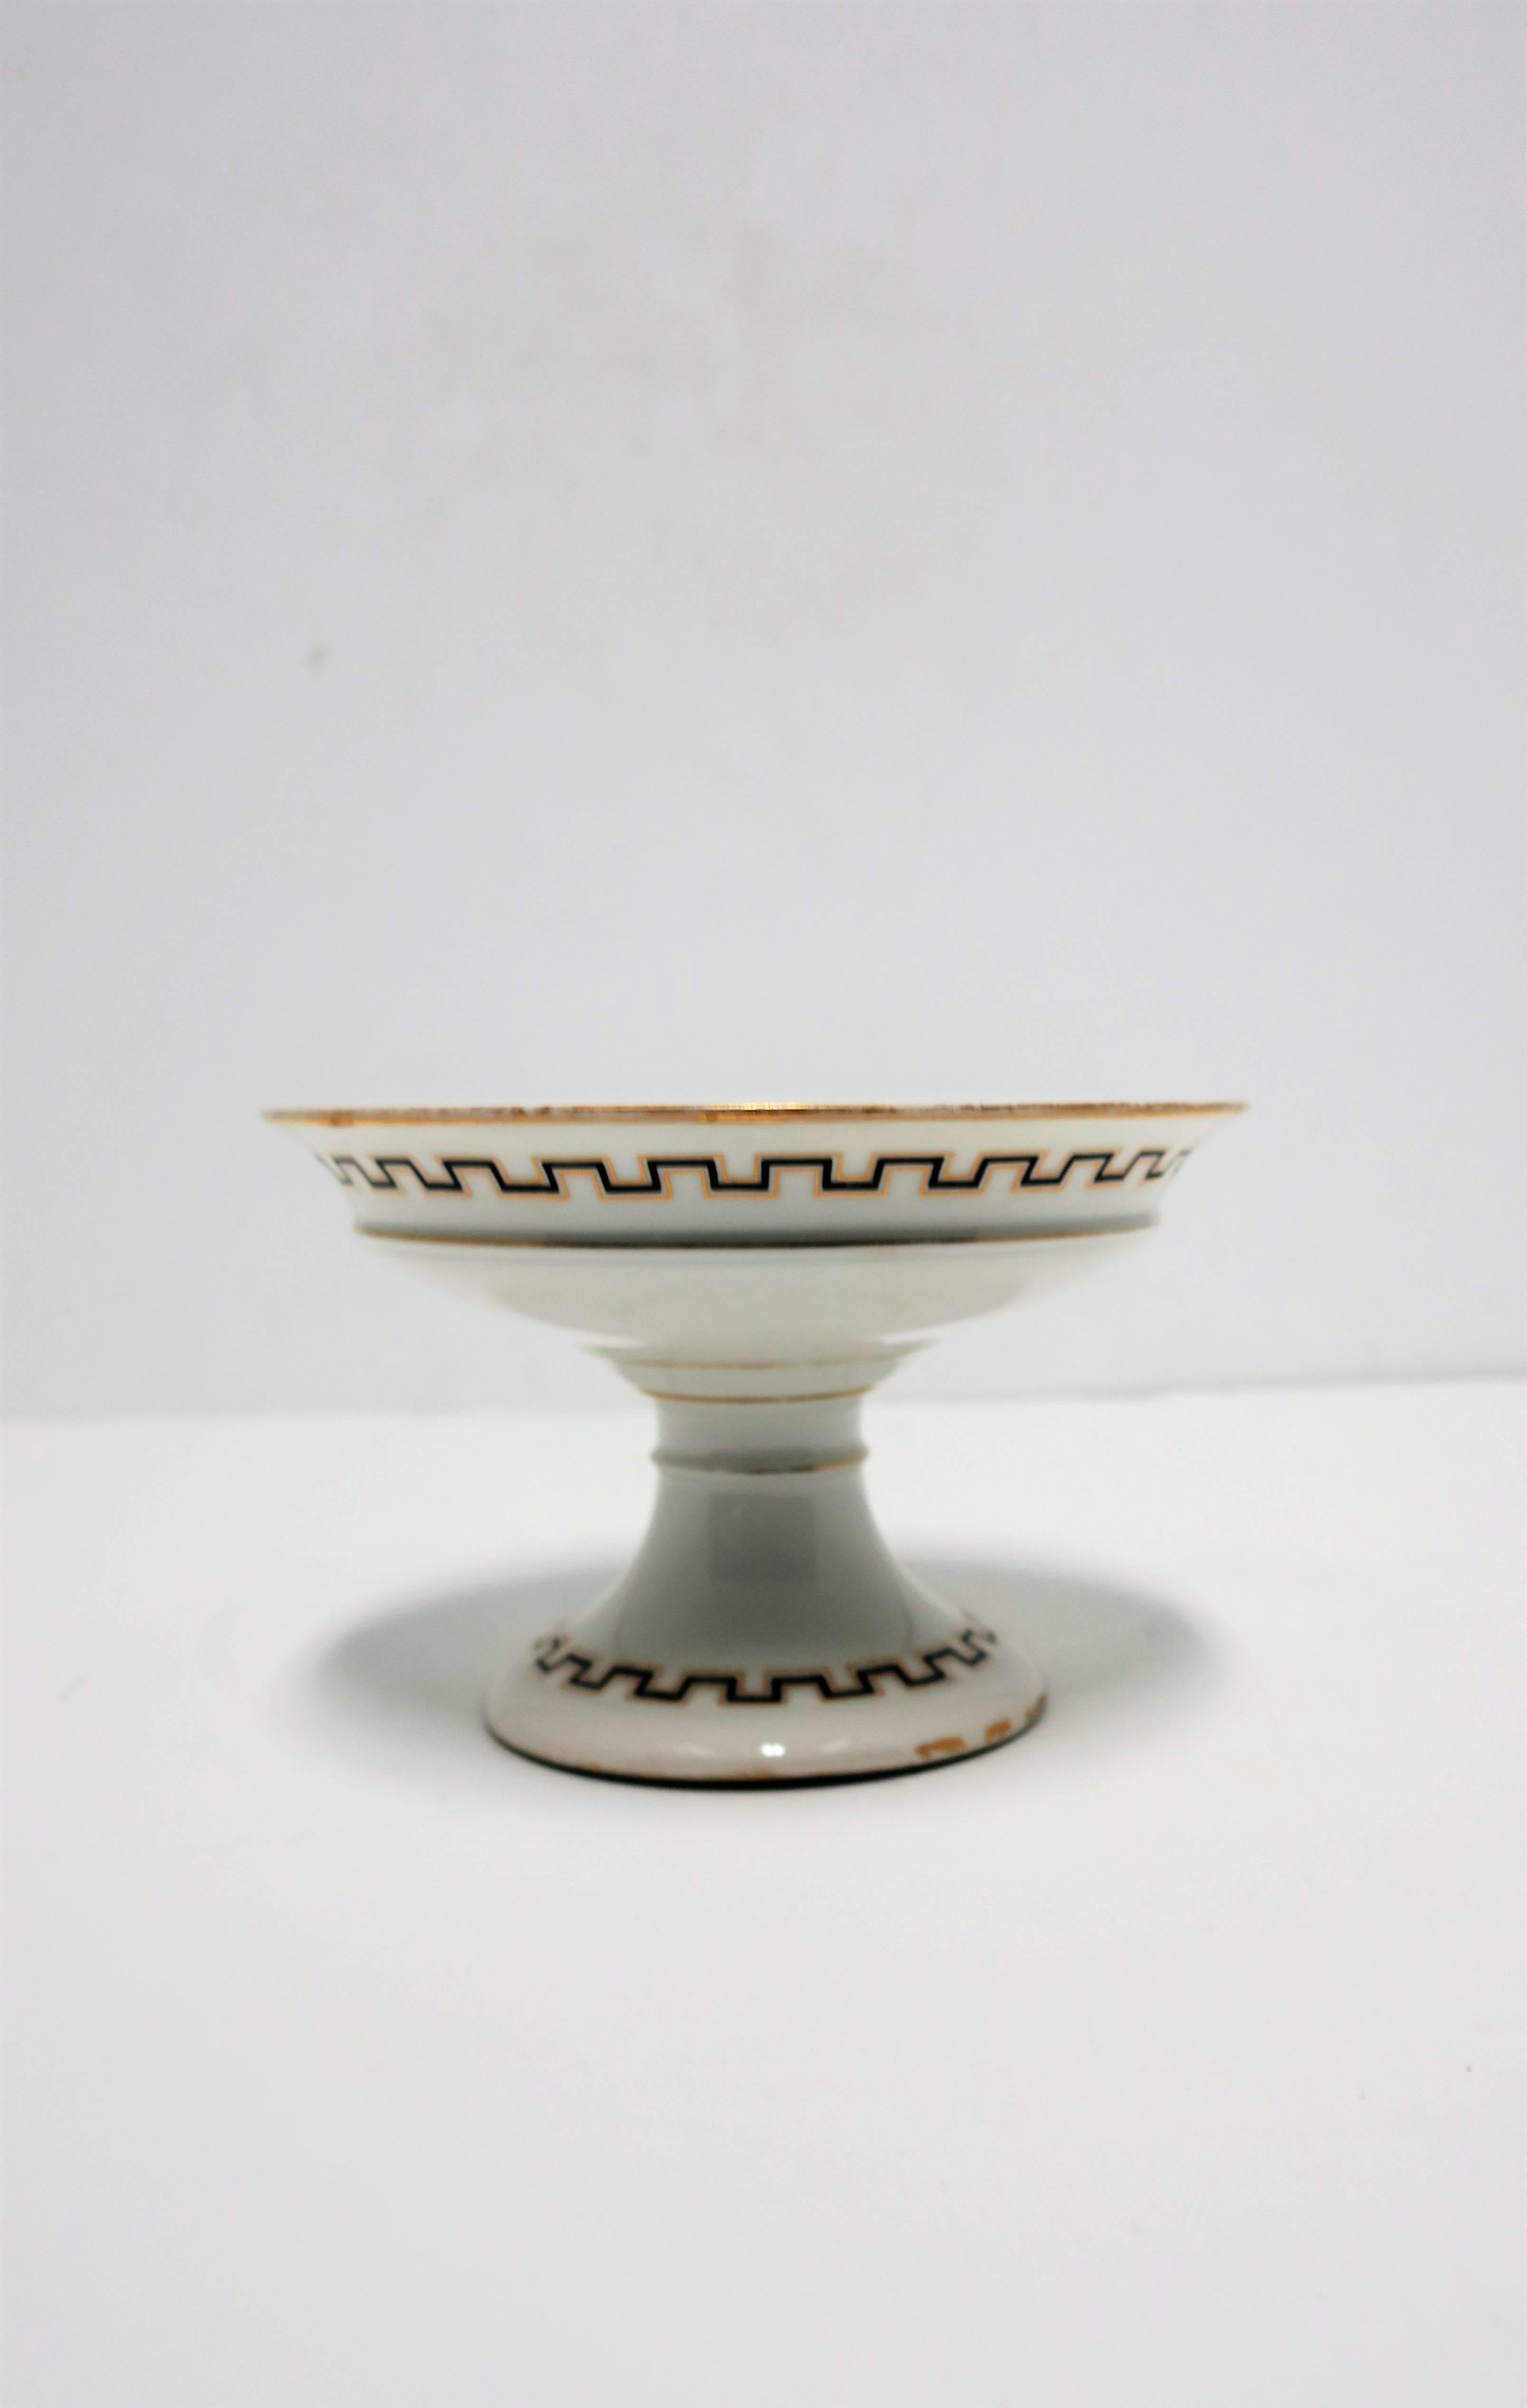 A beautiful Italian white, black, and gold ceramic tazza or compote footed pedestal bowl in the Greco-Roman or Classical Roman style, circa mid-20th century, Italy. Piece bears three heads or faces that surround interior area, accompanied by a